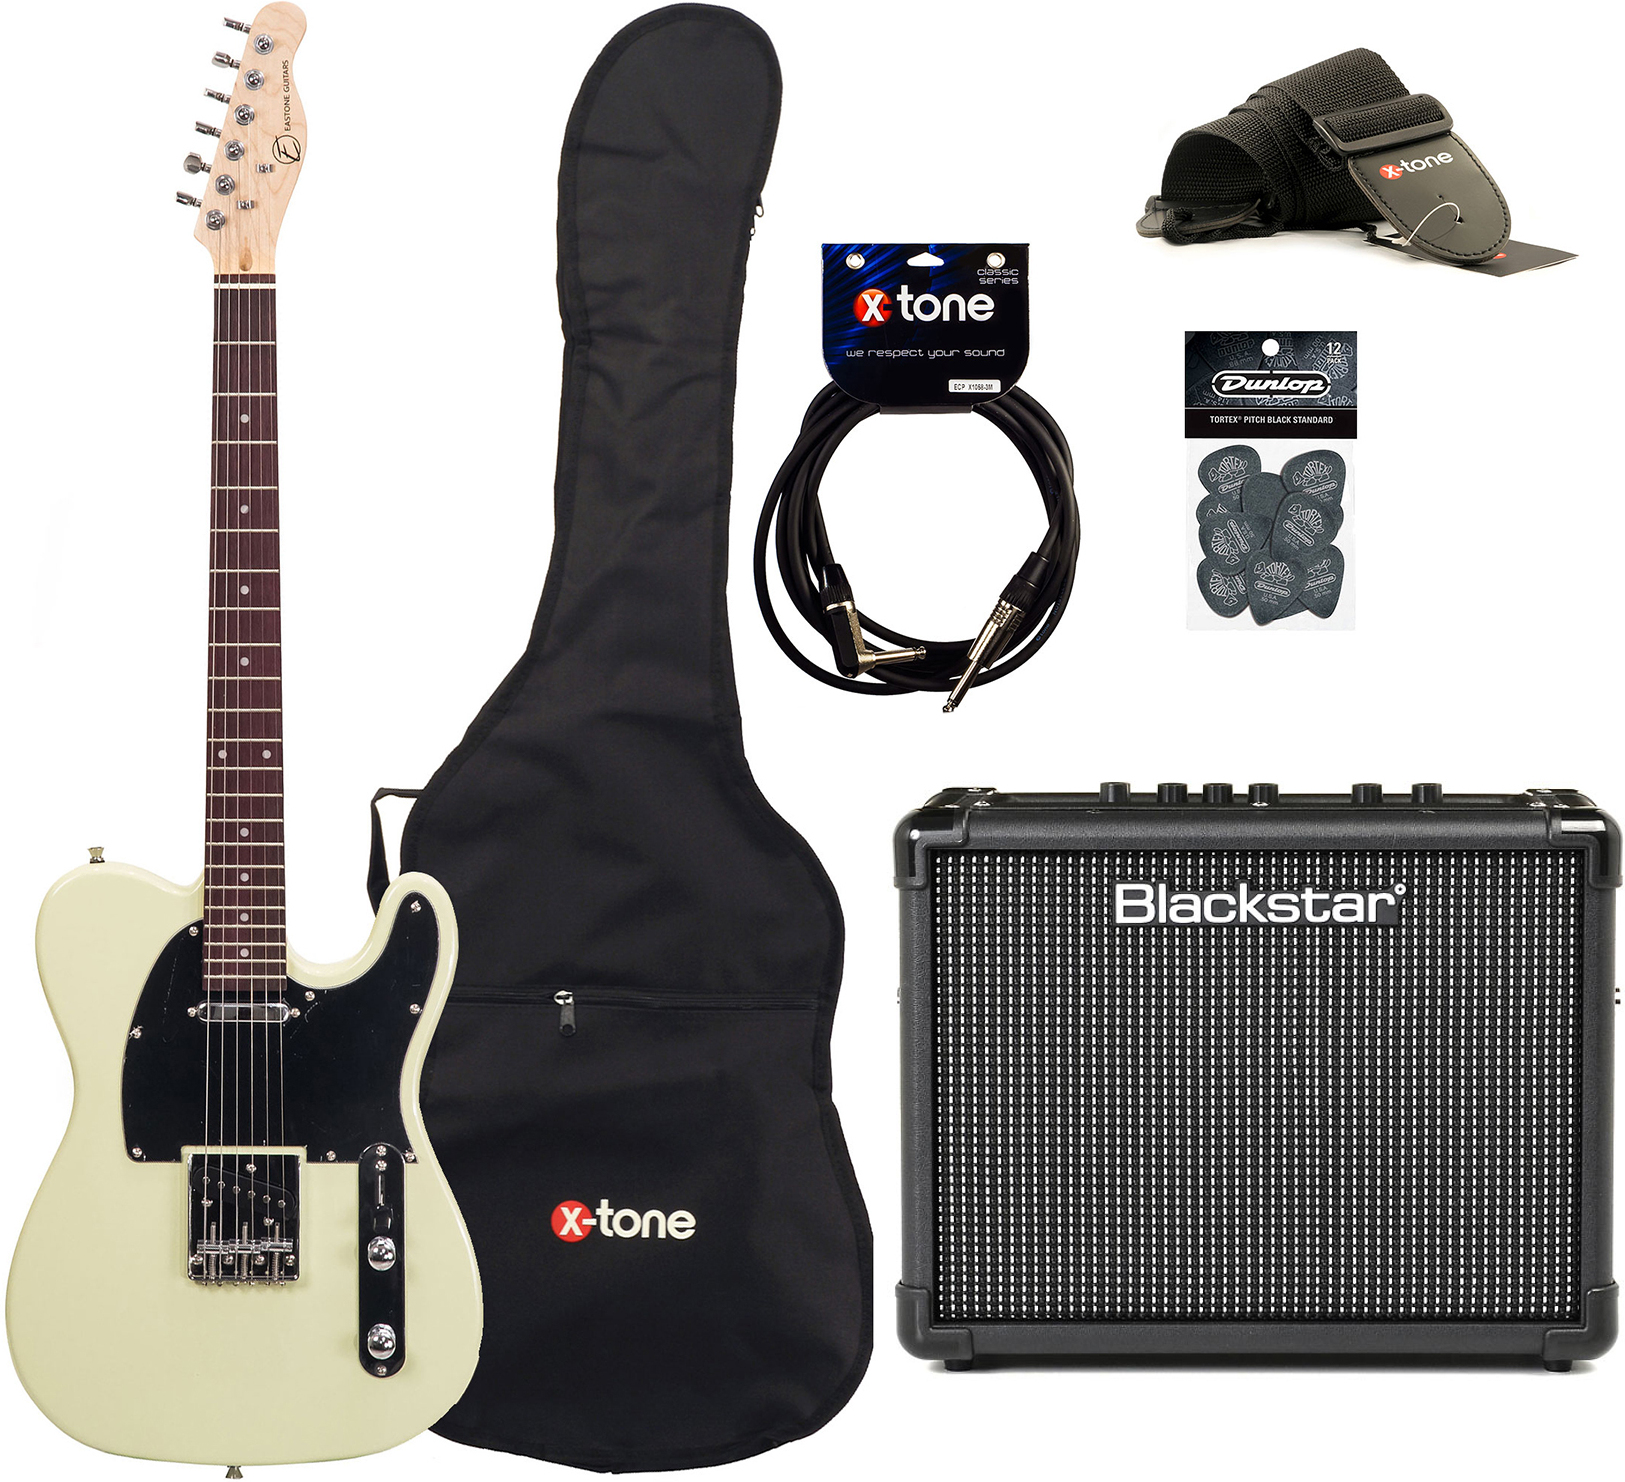 Eastone Tl70 +blackstar Id Core Stereo 10 V3 +cable +housse +courroie +mediators - Ivory - Packs guitarra eléctrica - Main picture